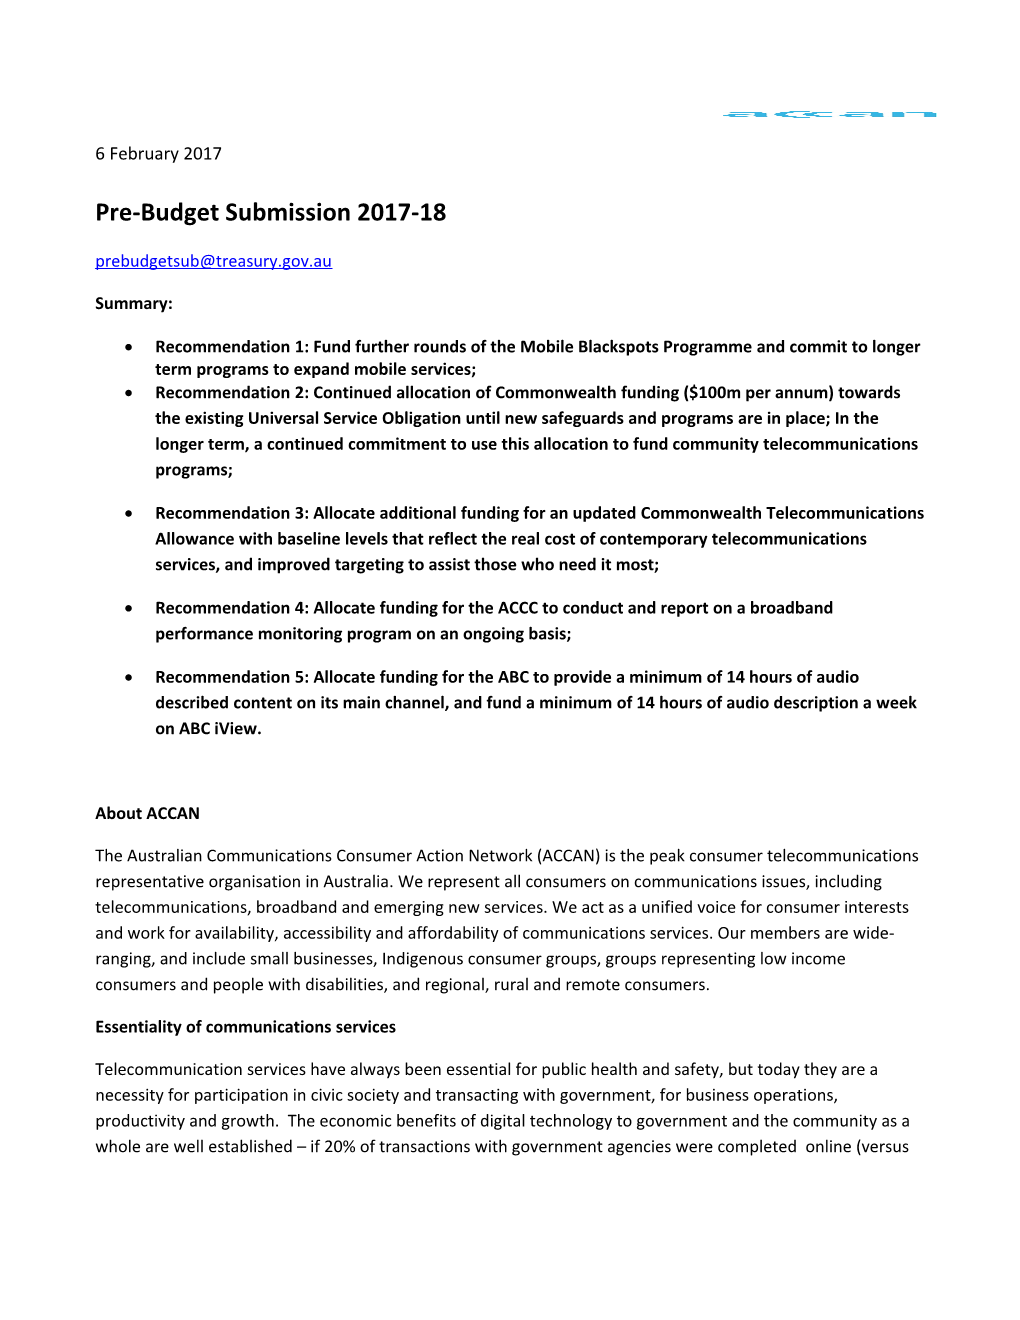 Pre-Budget Submission 2017-18